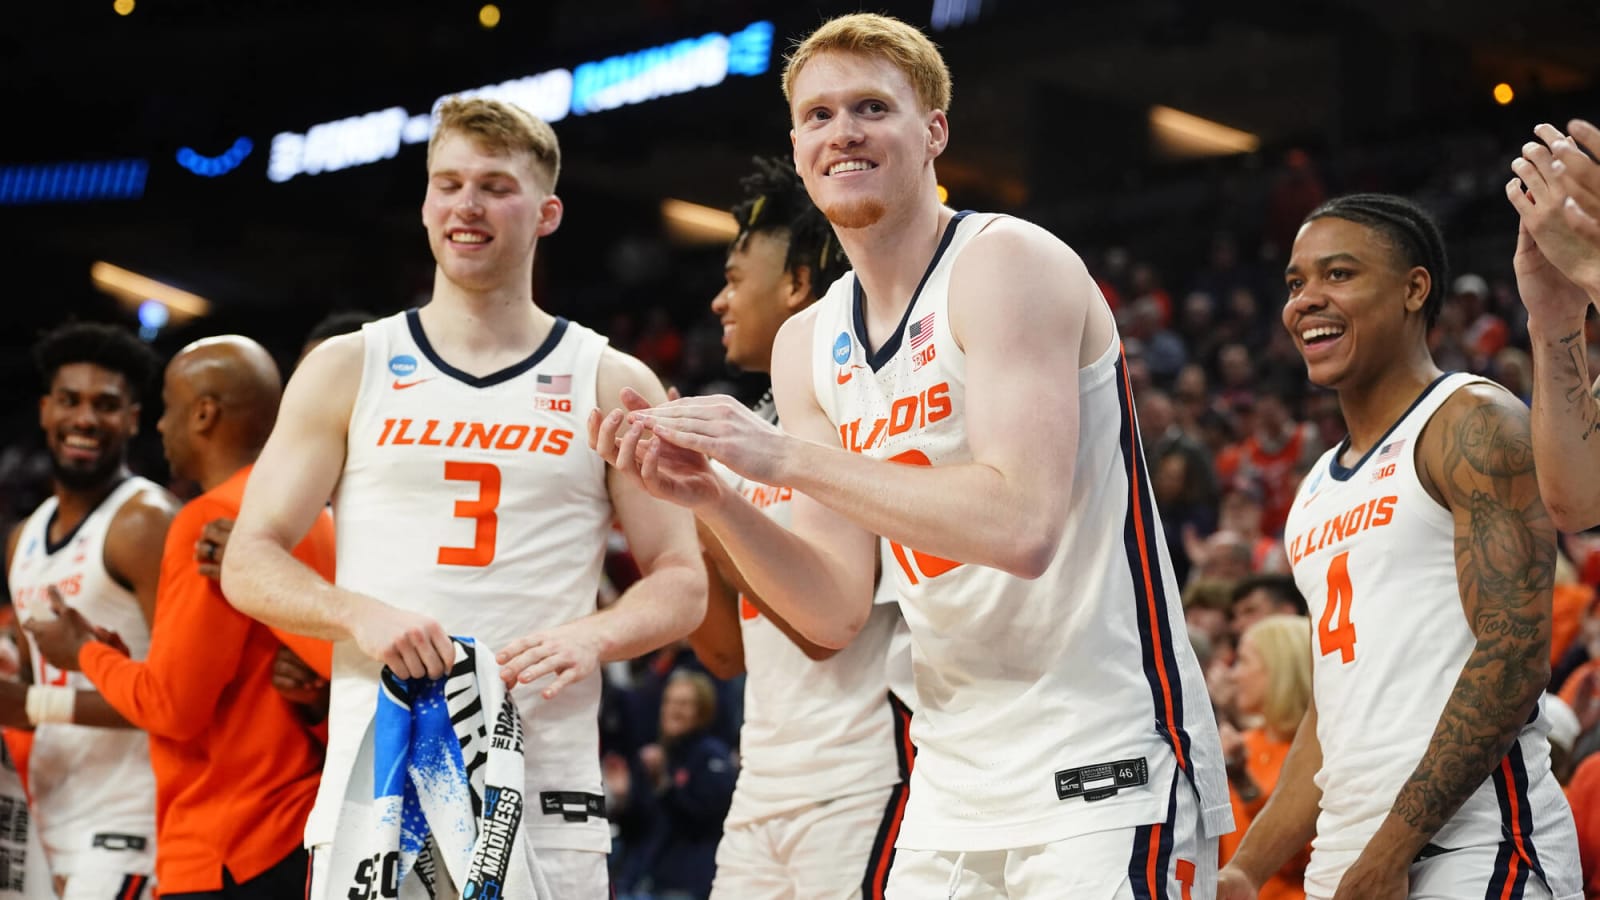 How to Watch Illinois vs. Iowa St. March Madness Sweet 16